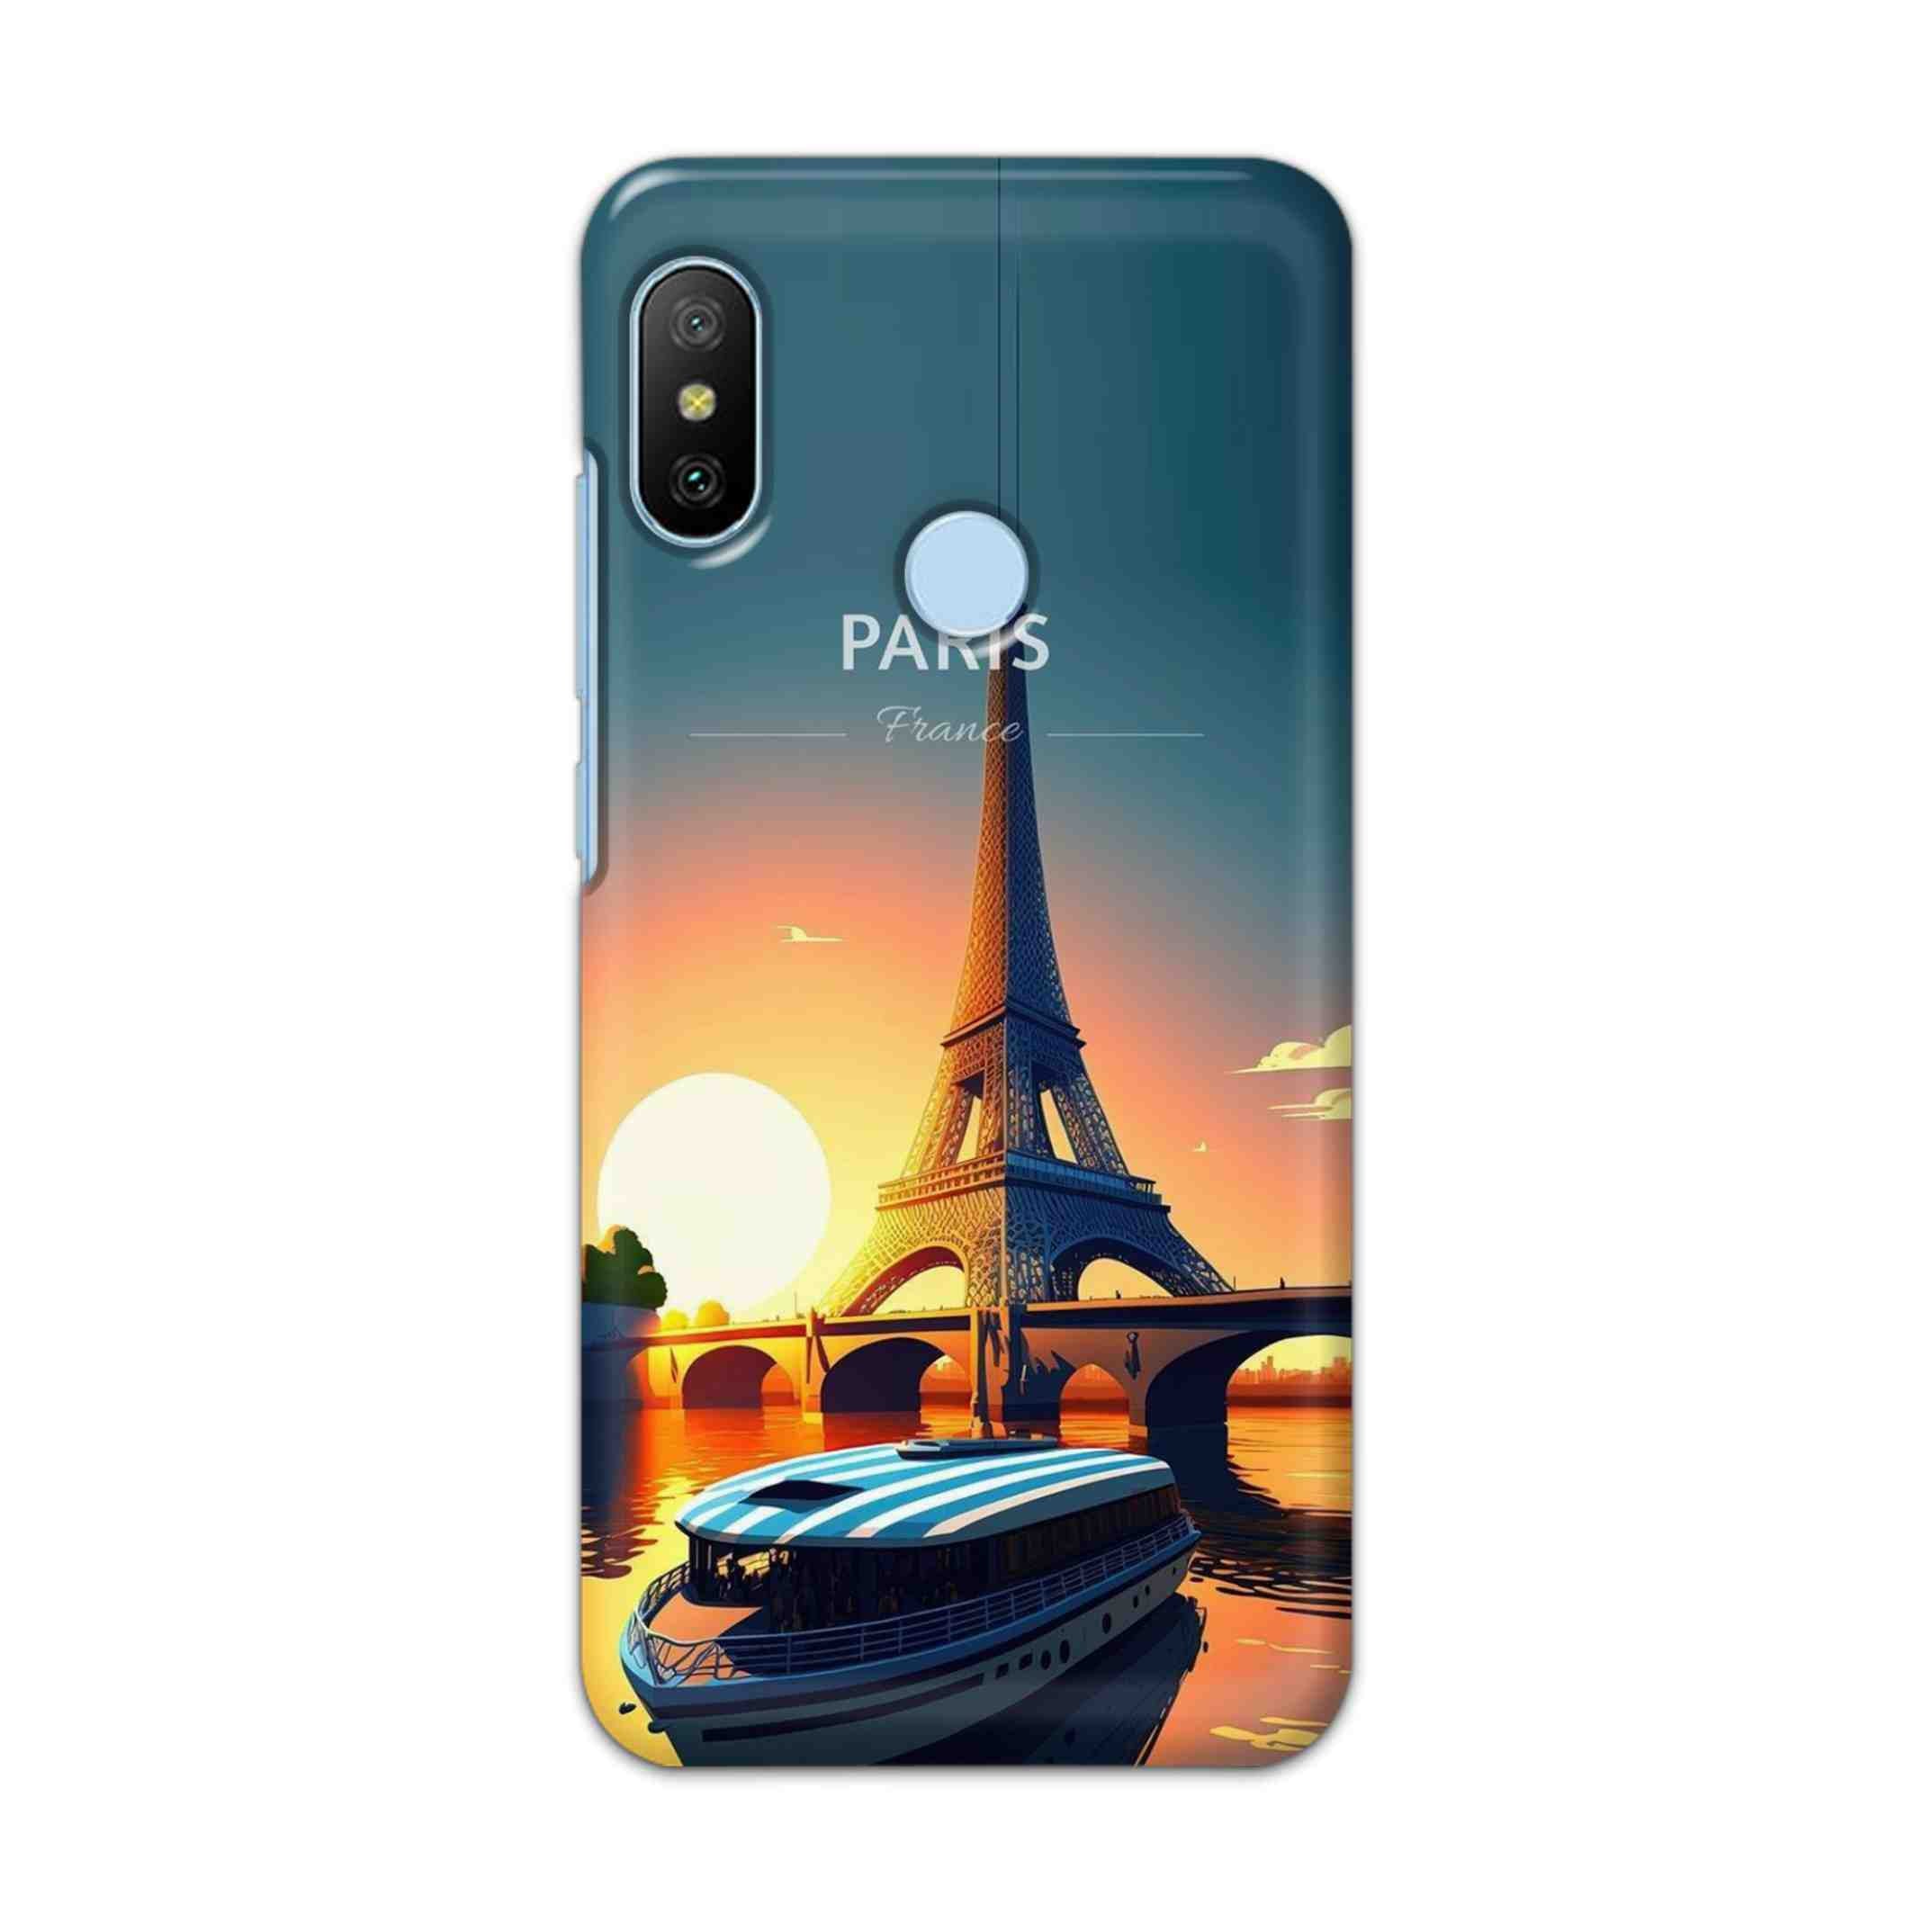 Buy France Hard Back Mobile Phone Case/Cover For Xiaomi Redmi 6 Pro Online